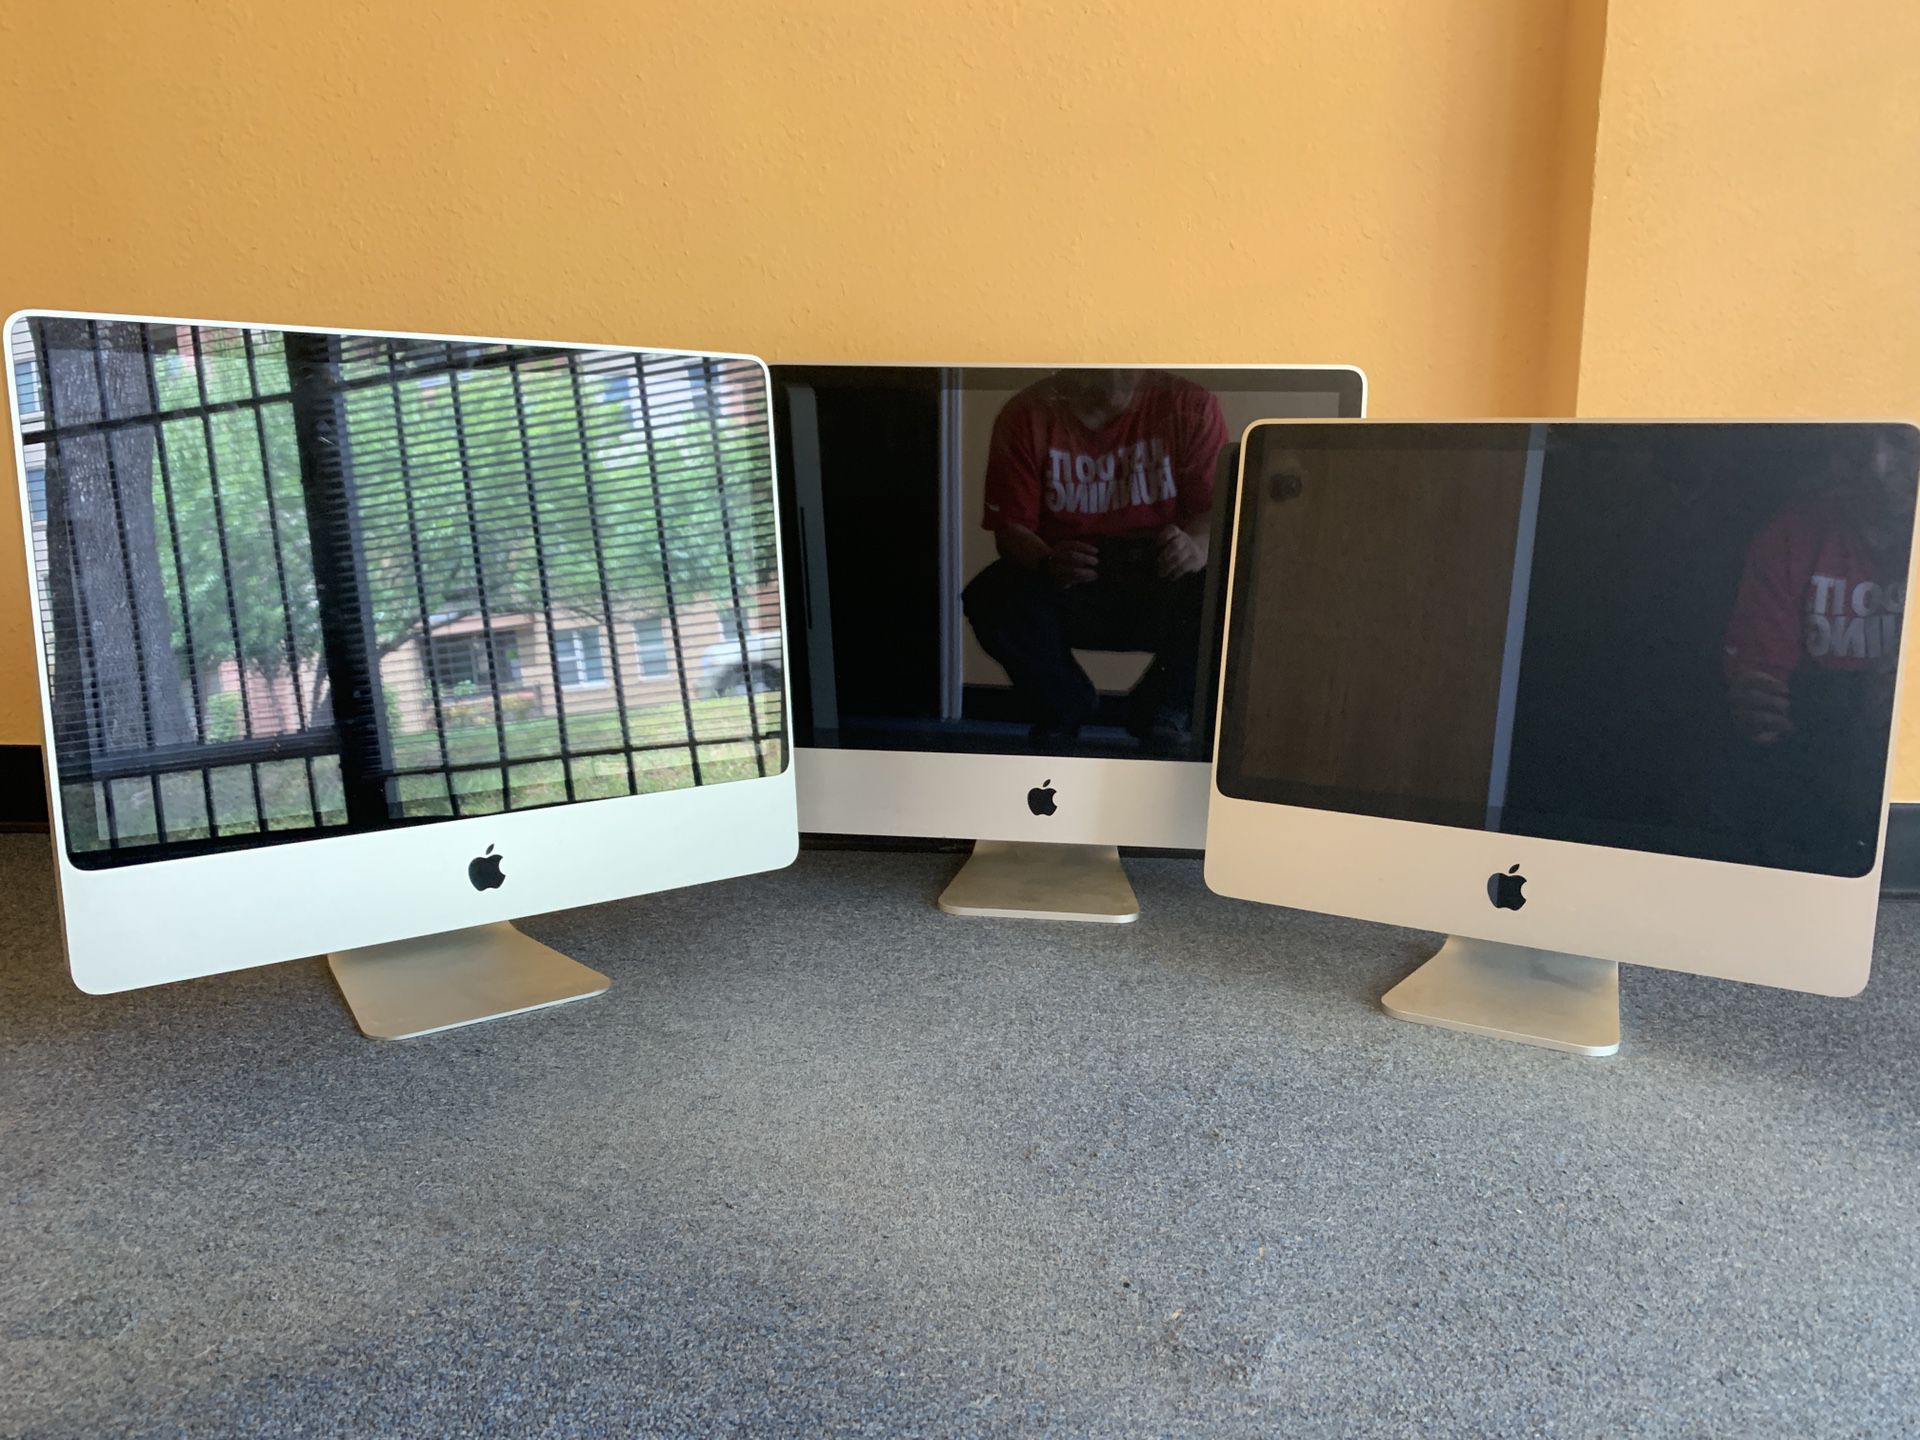 Lot of 3 iMac desktop computers for sale not working for parts